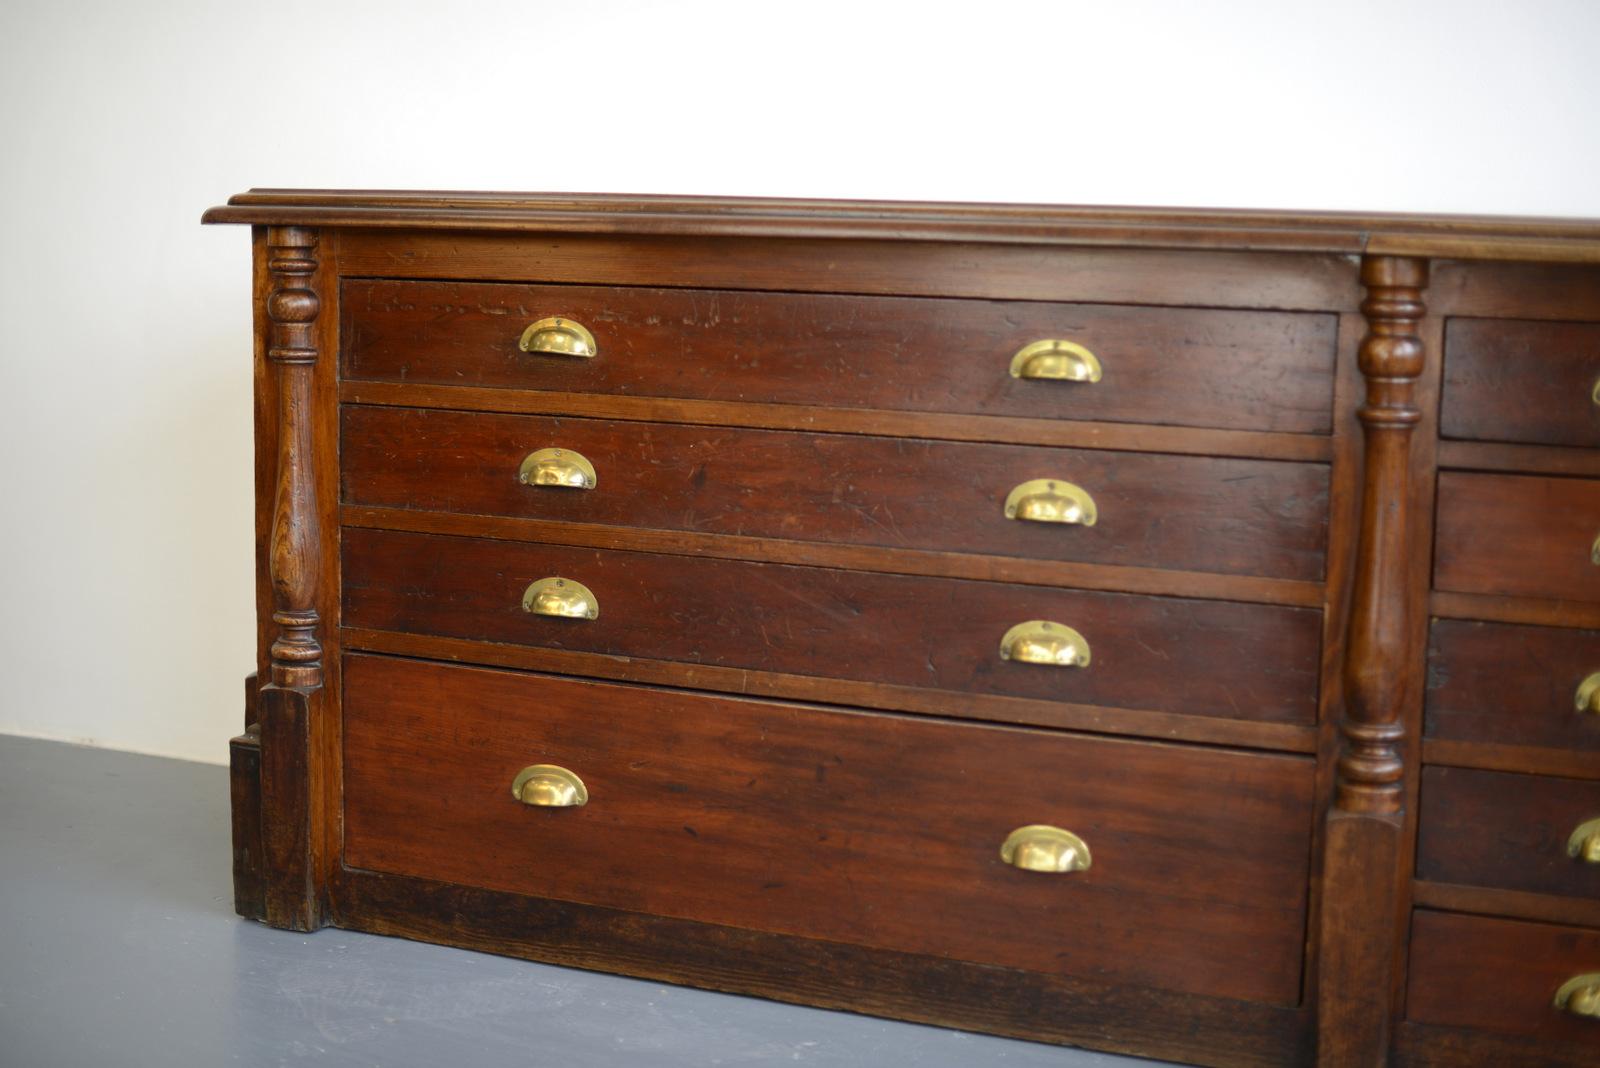 Large pine and mahogany Georgian shop counter

- Pine drawers and frame
- Solid mahogany top with original brass inlaid ruler
- Panelled sides with decorative columns
- Original brass cup handles
- Ruler is stamped with the King George II